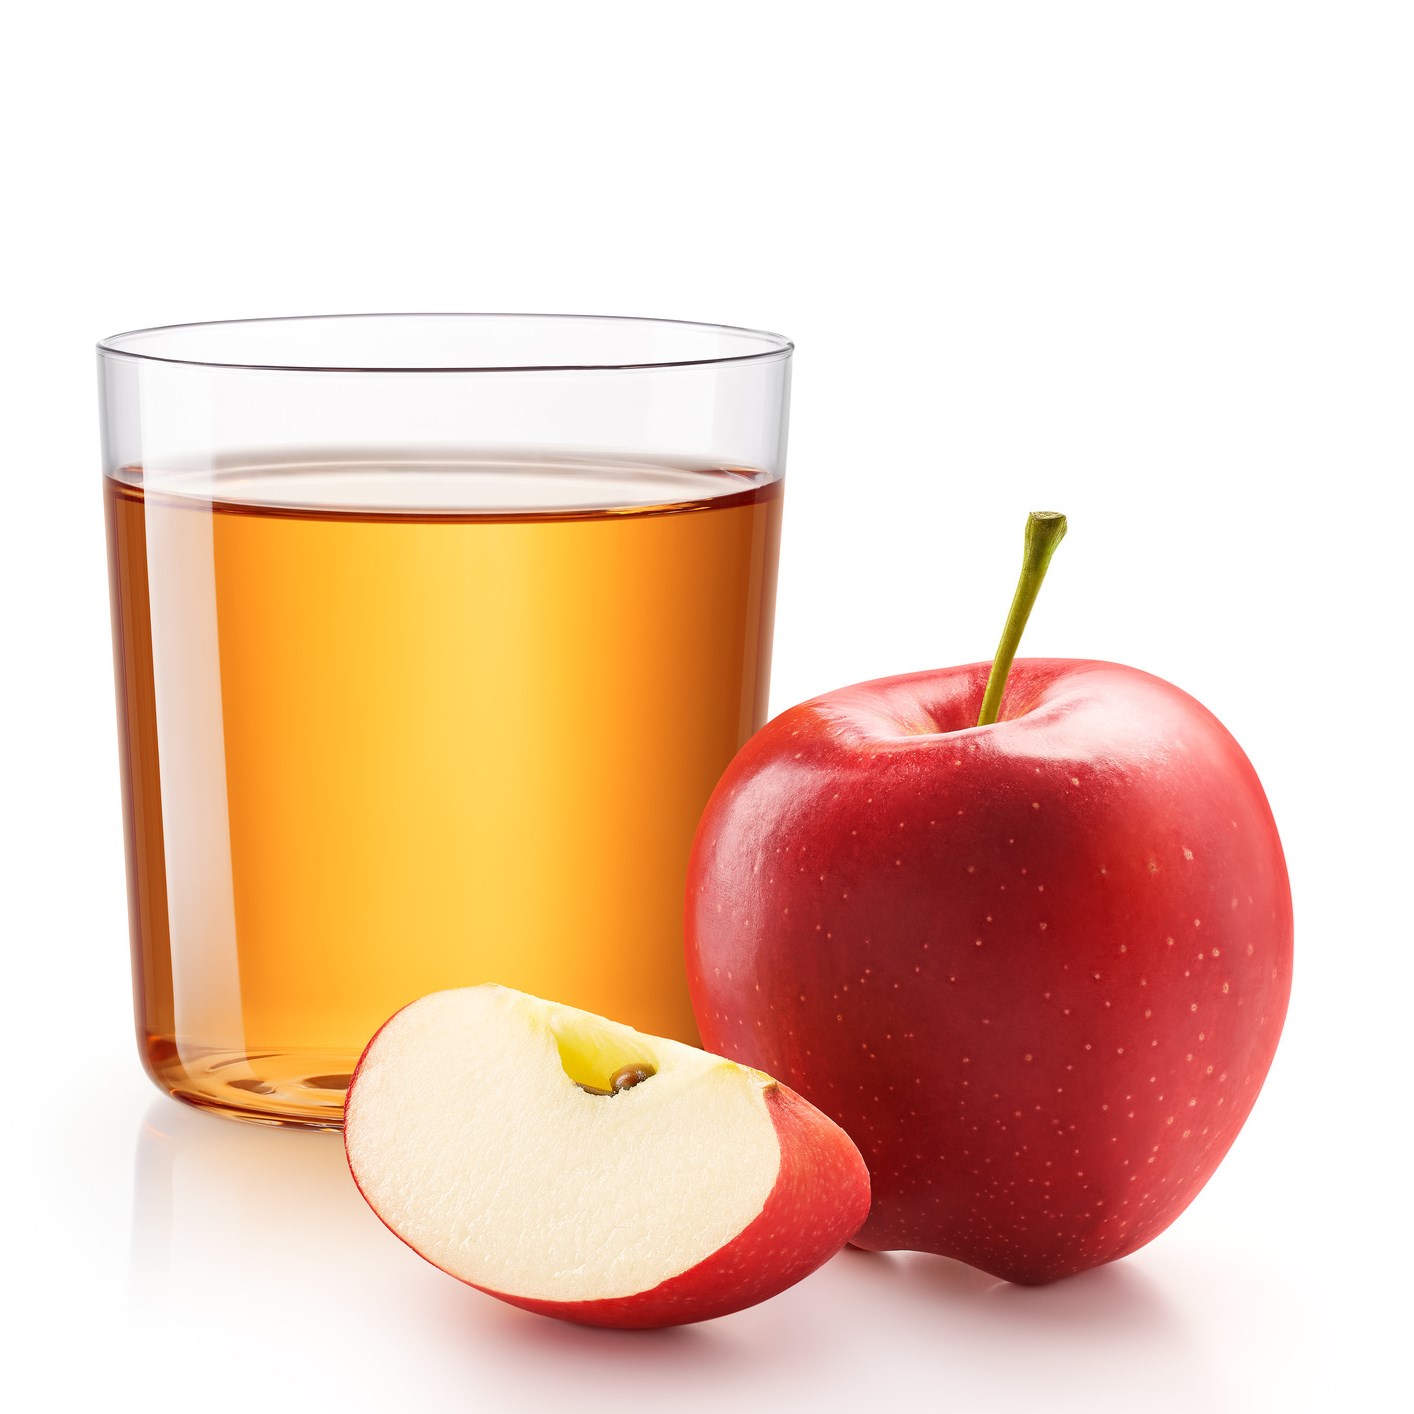 A glass of apple juice with red apples isolated on white background